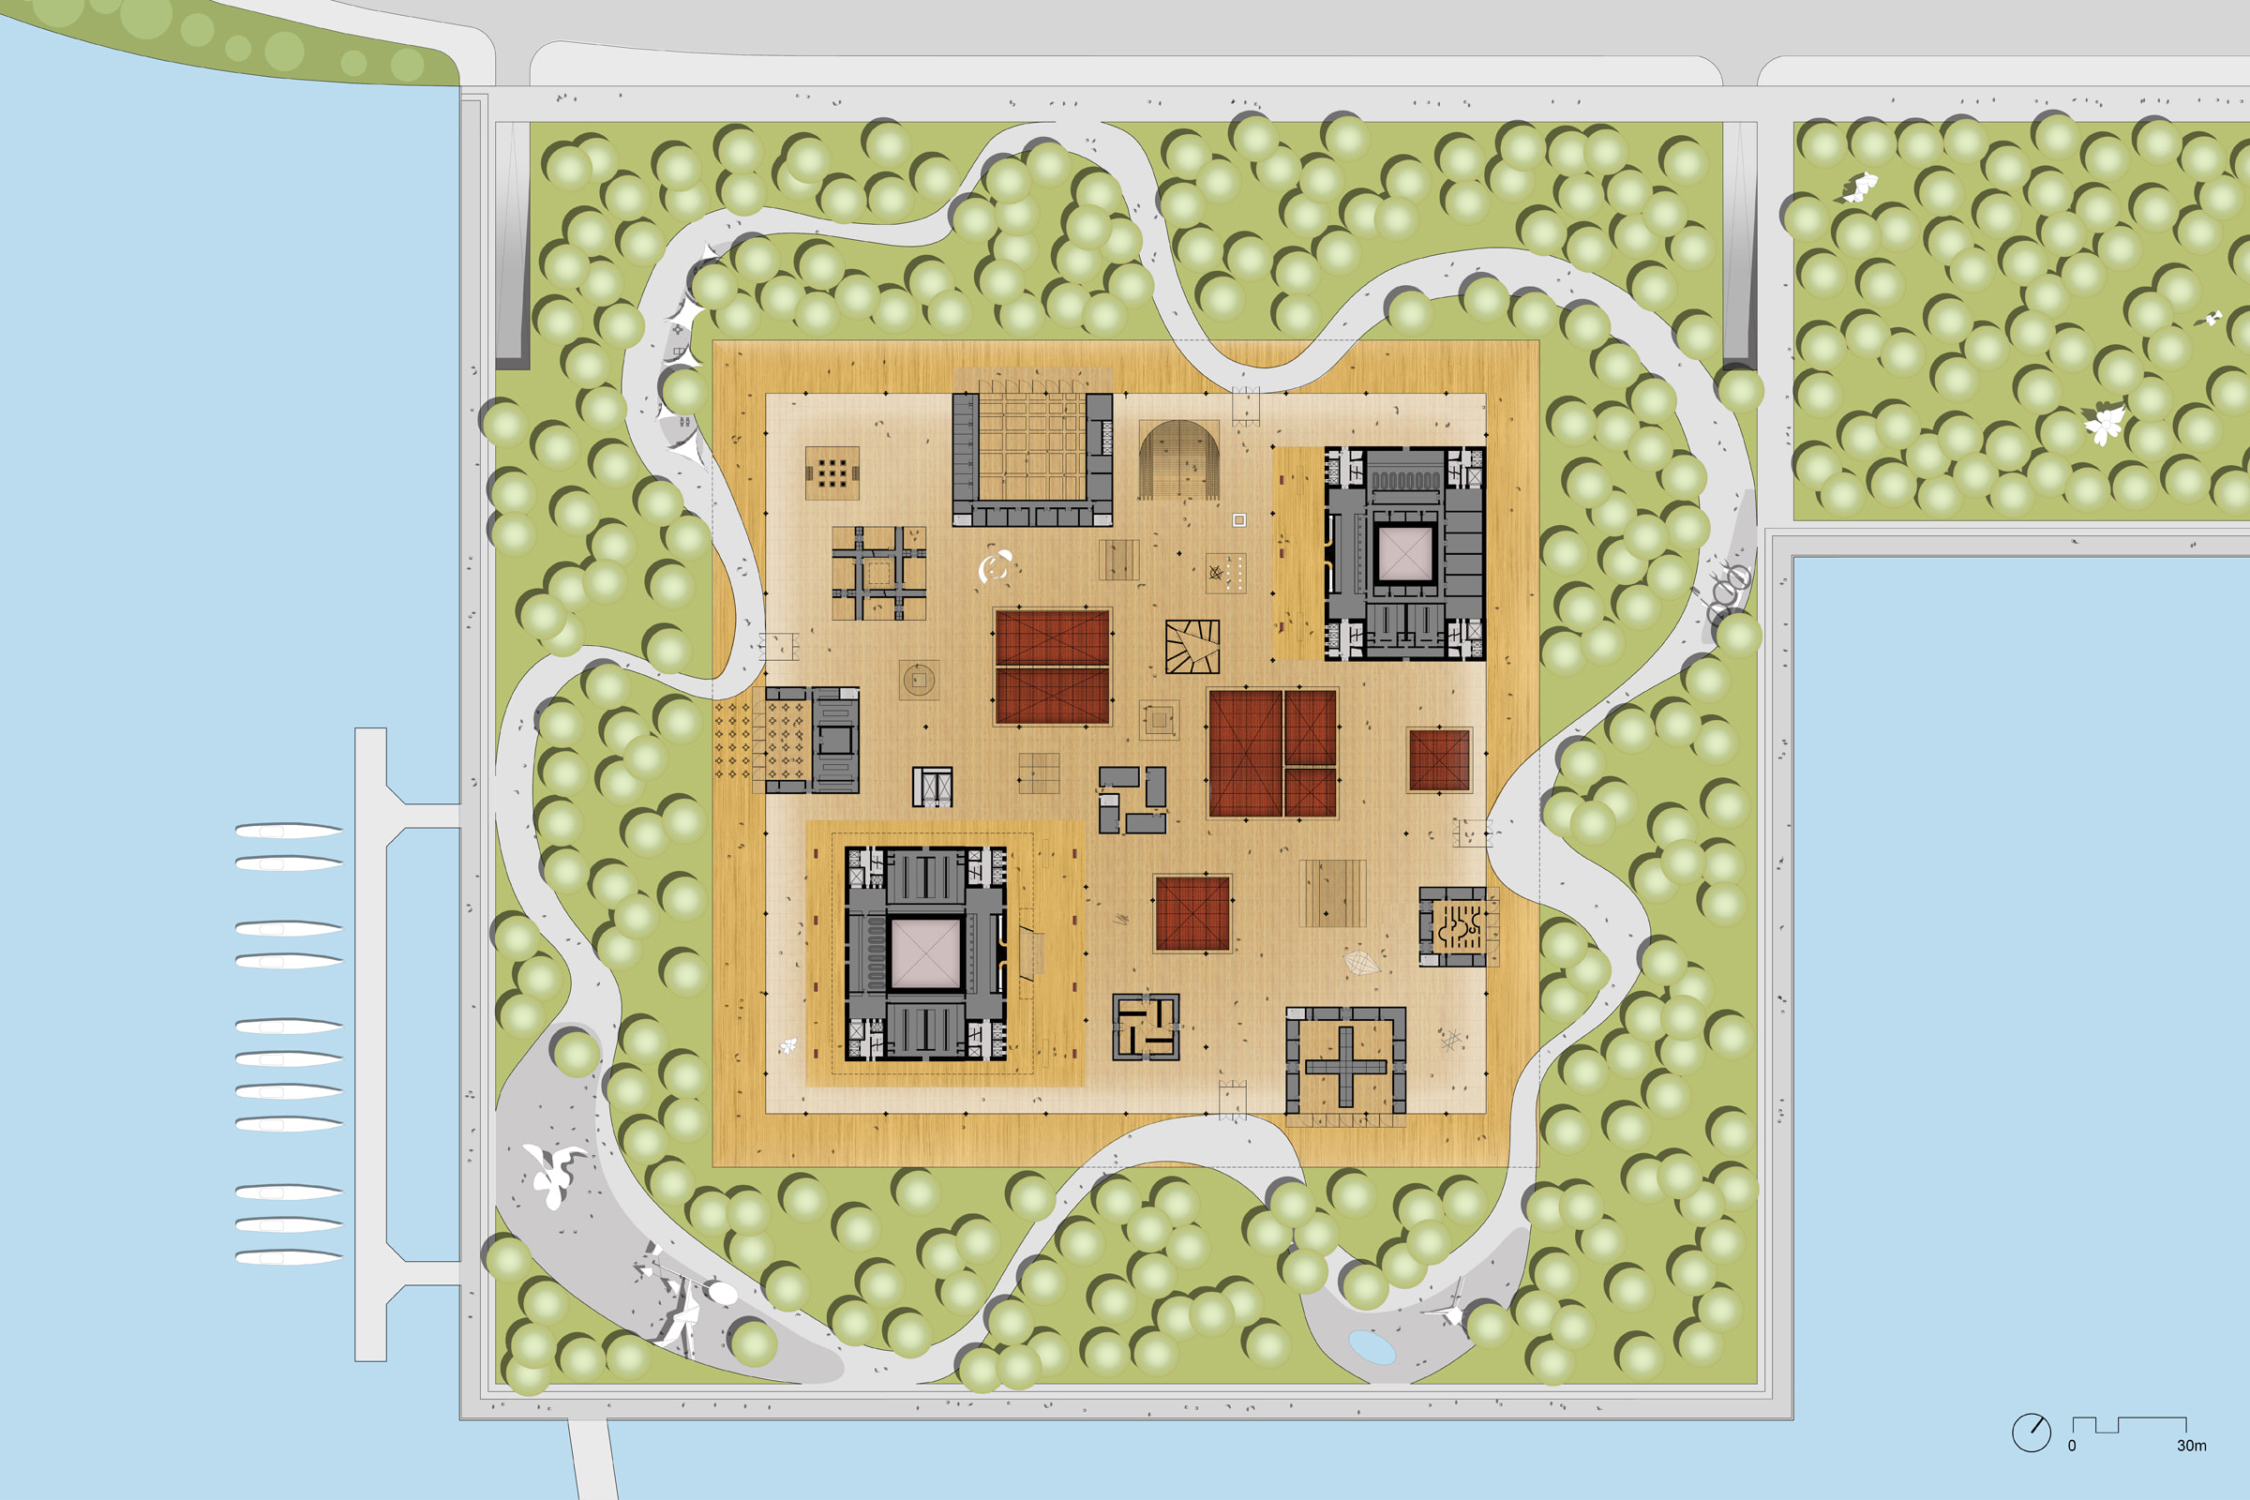 A plan of the Shenzhen Opera House's Gallery within the site.